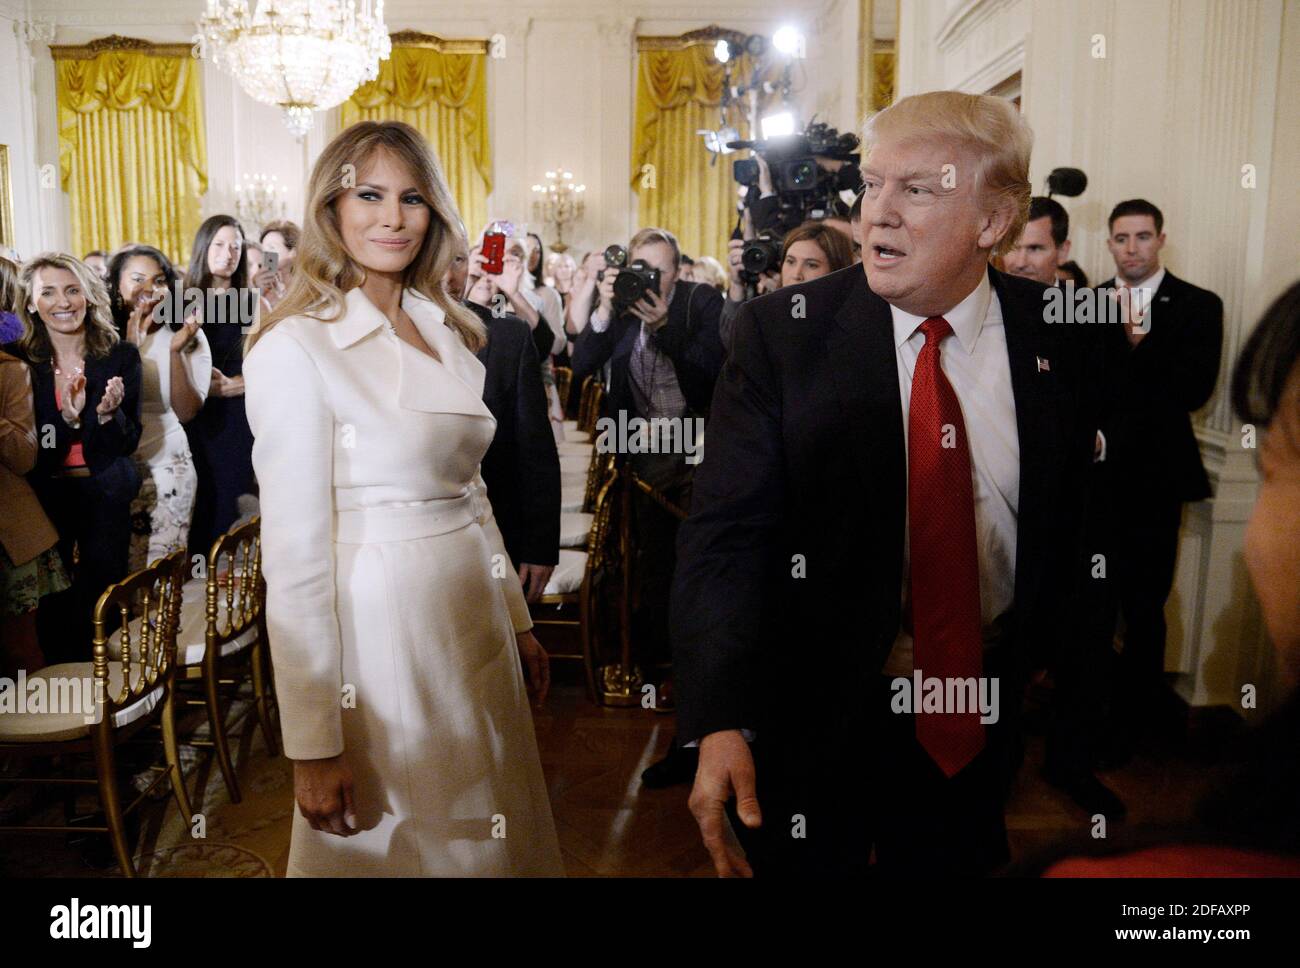 File photo - First Lady Melania Trump and President Donald Trump attend the WomenâÂ€Â™s Empowerment Panel at the White House in Washington, DC, March 29, 2017.A new, scrupulously reported biography by Washington Post reporter Mary Jordan argues that the first lady is not a pawn but a player, an accessory in the second as much as the first sense, and a woman able to get what she wants from one of the most powerful and transparently vain men in the world. The book is called The Art of Her Deal. Photo by Olivier Douliery/ Abaca Stock Photo